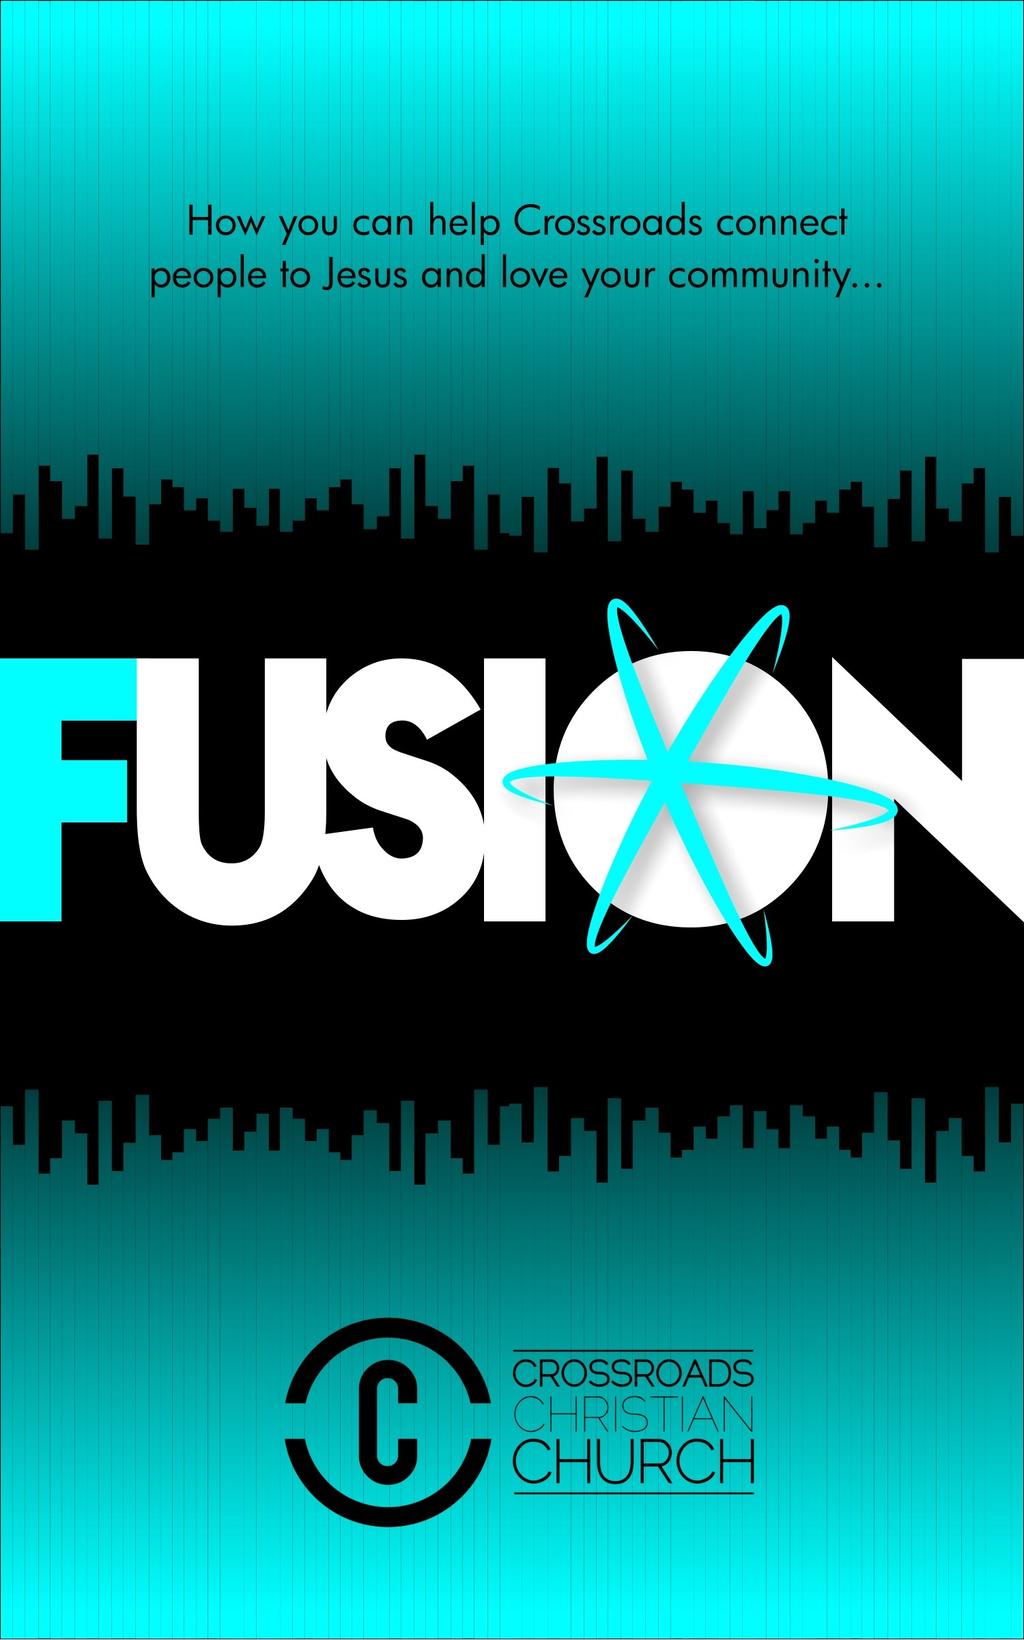 FUSION FAIR How you can help Crossroads connect people to Jesus and love our community... Crossroads Christian Church 1816 N Missouri St. Macon, MO 63552 Phone: (660) 385-4813 crossroads@cvalley.